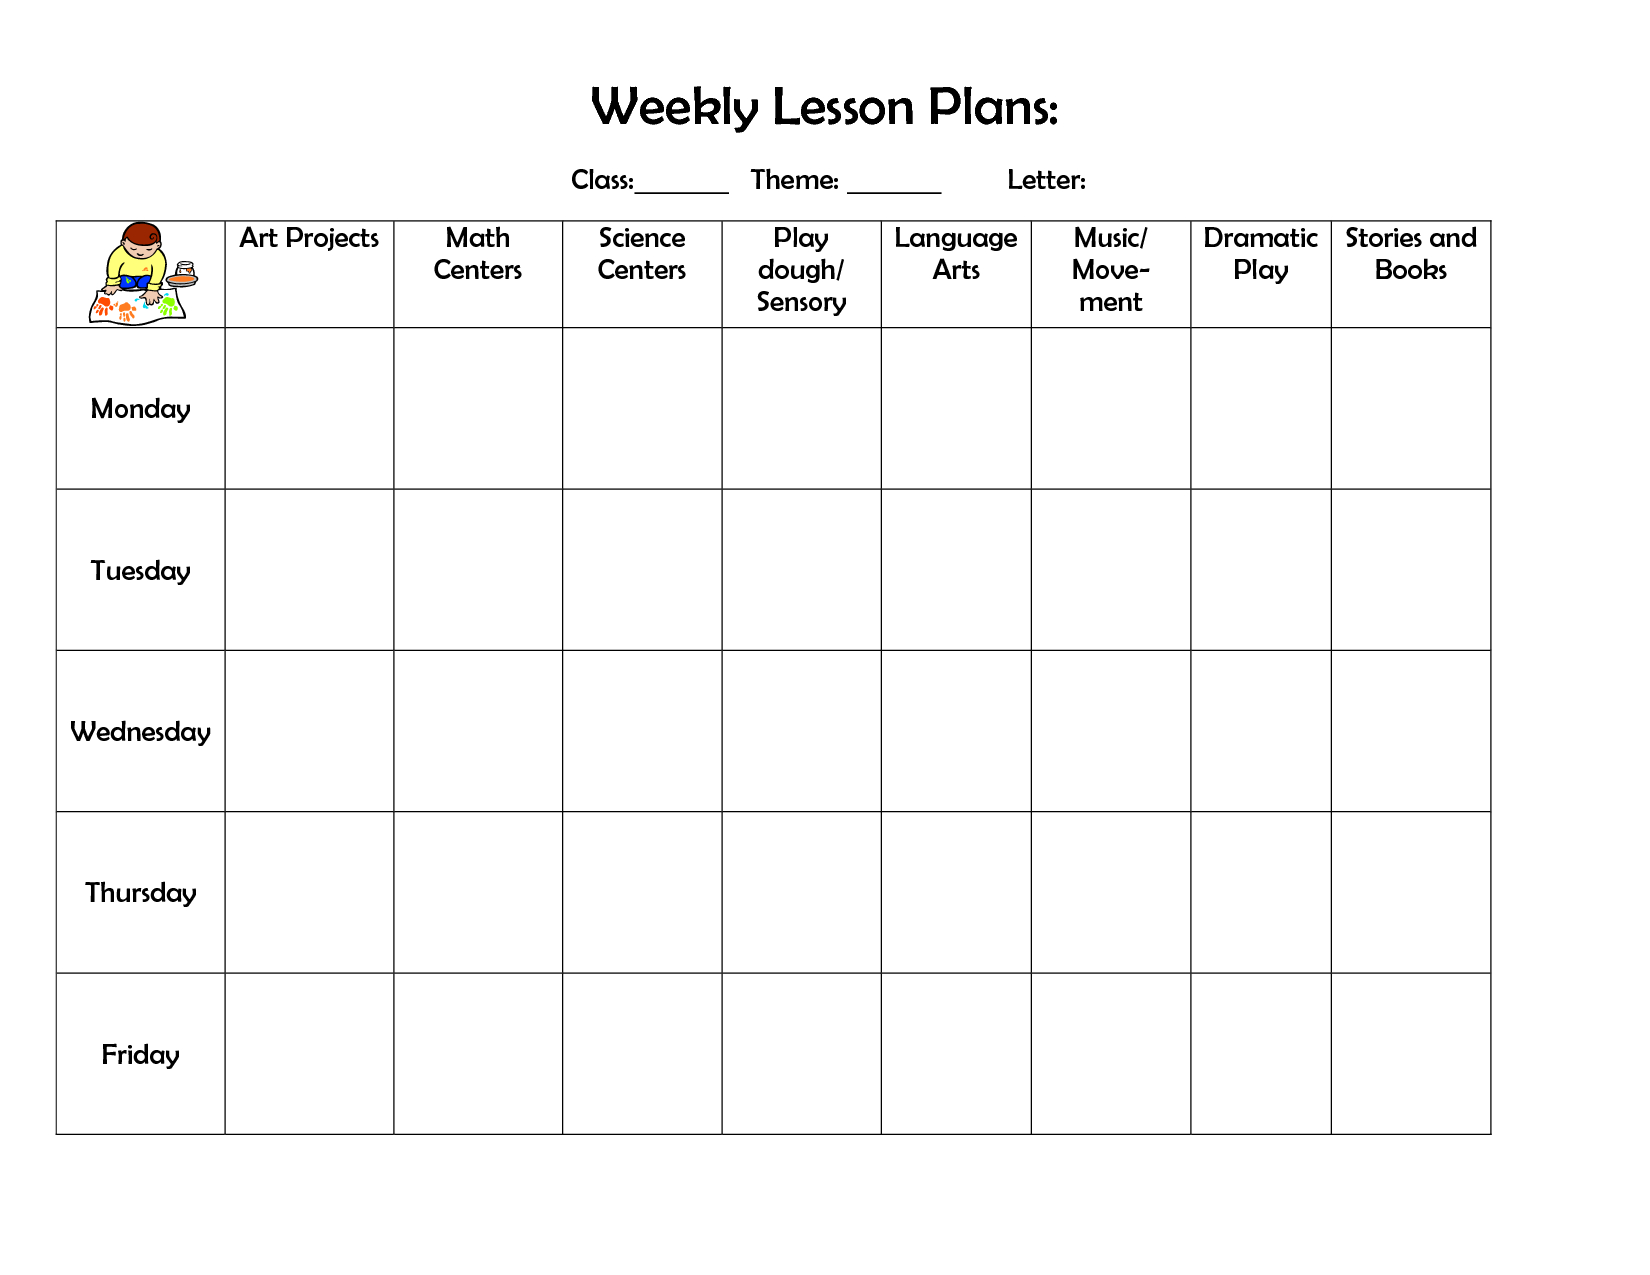 Weekly Lesson Plan Template - Lesson Plans Learning For Blank Preschool Lesson Plan Template